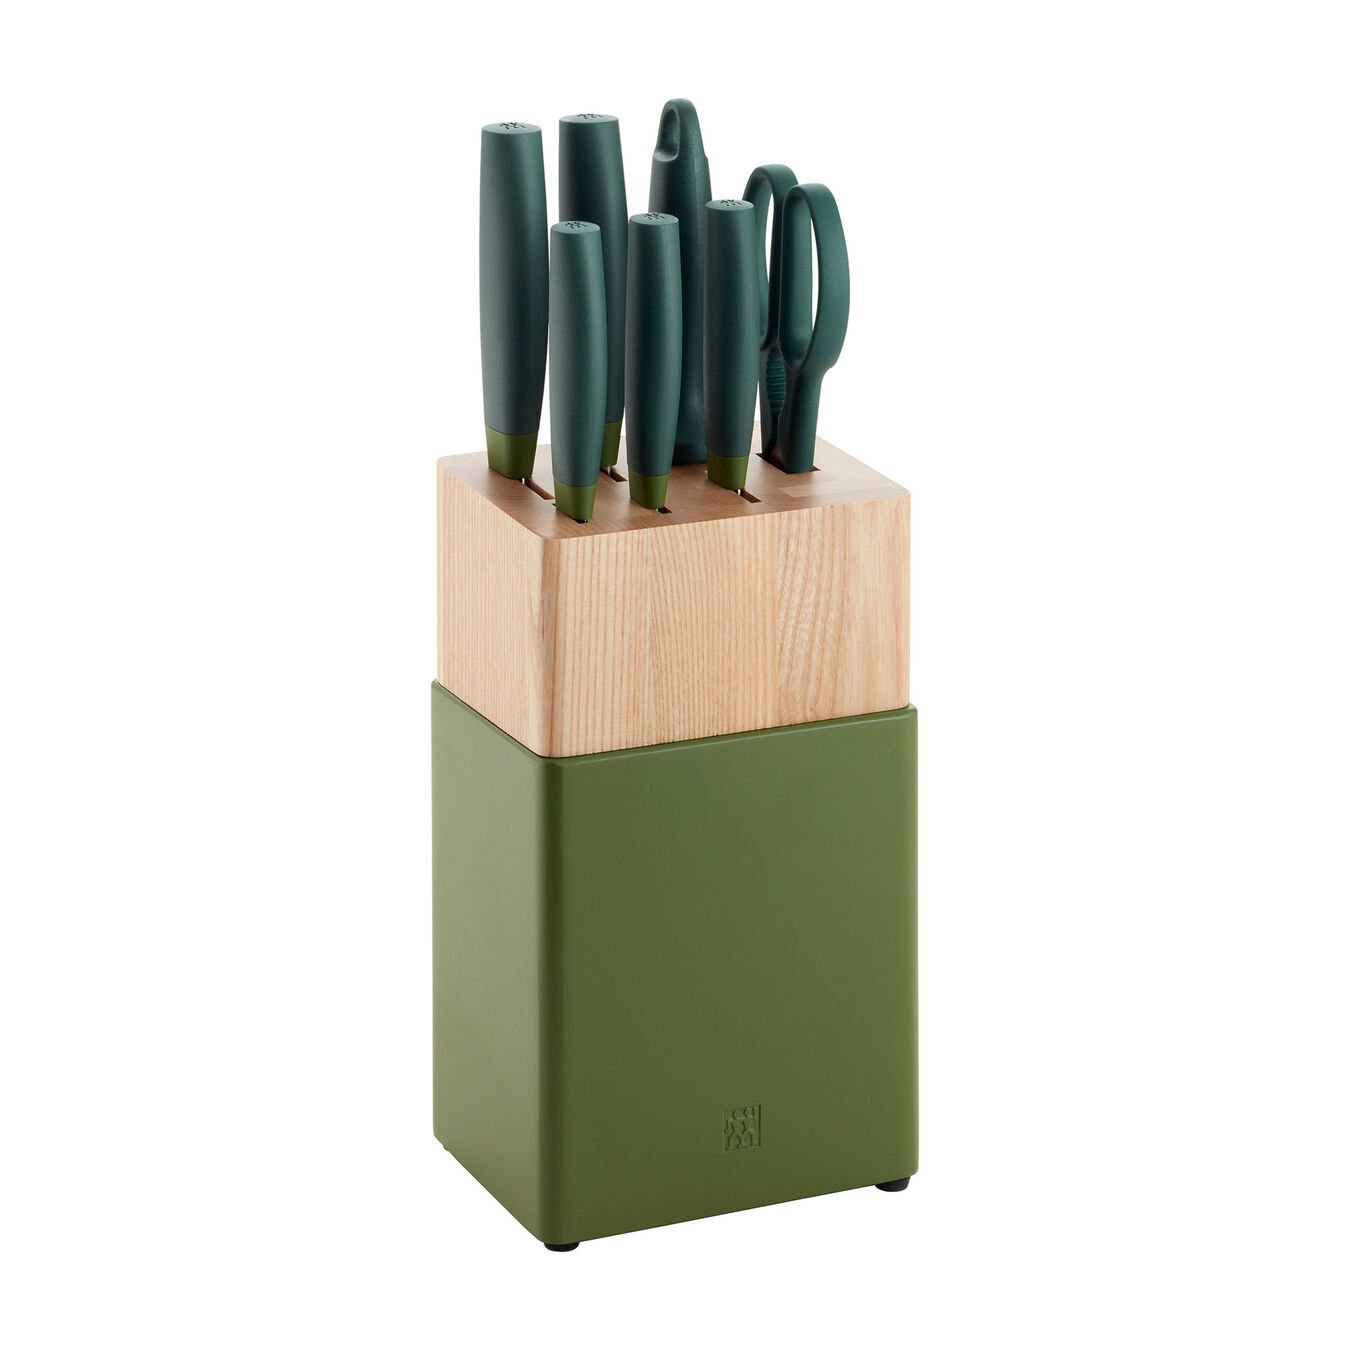 8-PC, Z NOW S KNIFE BLOCK SET, LIME GREEN for $85